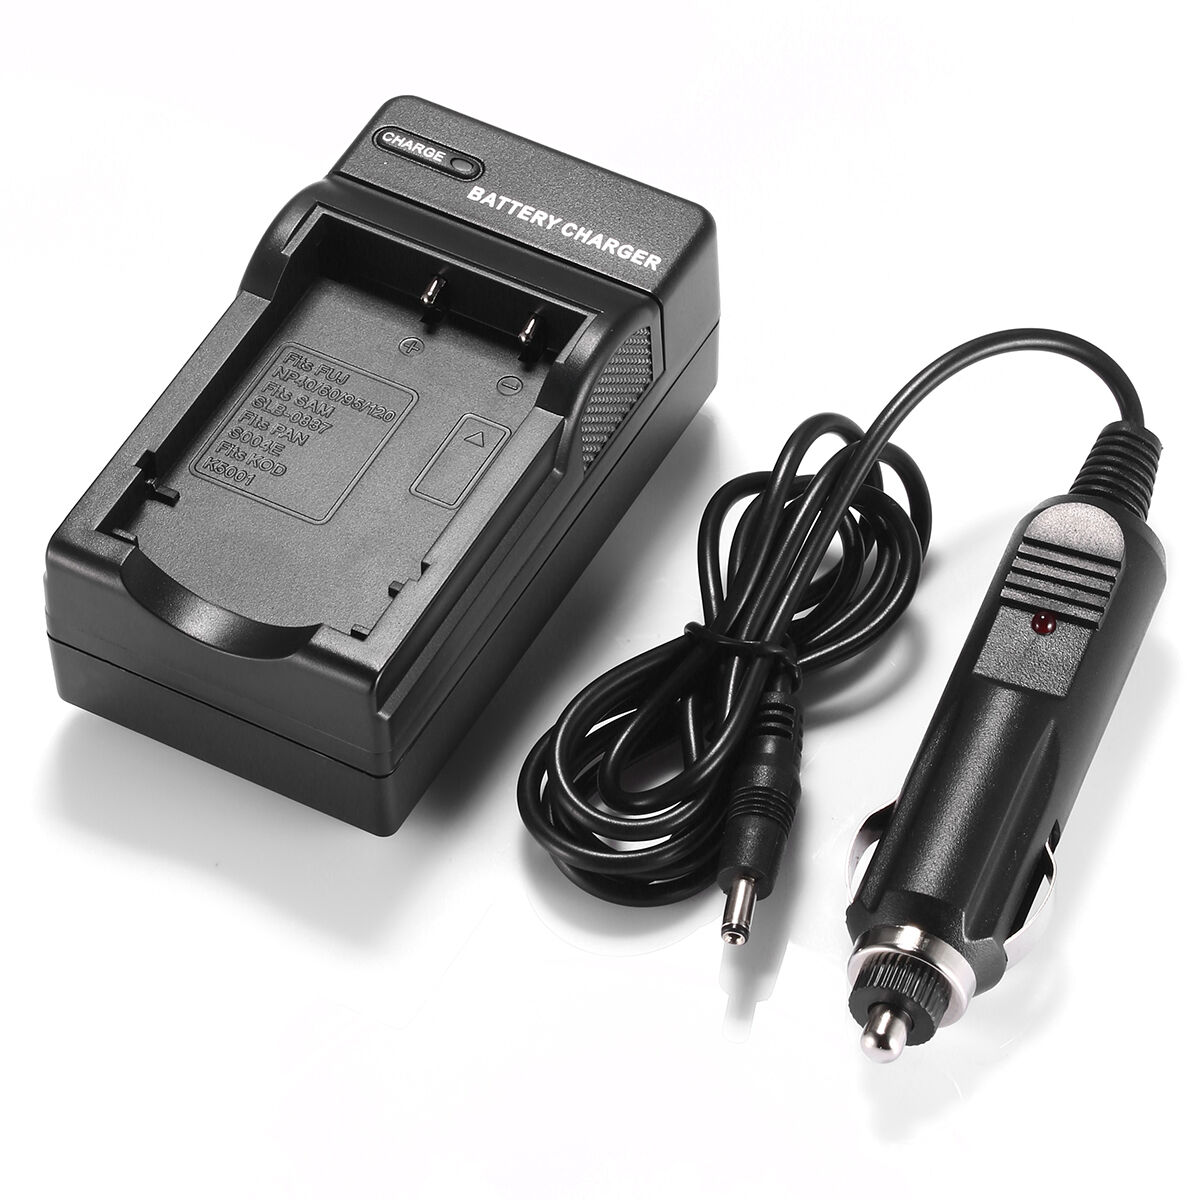 FUJIFILM P10N073780A battery charger